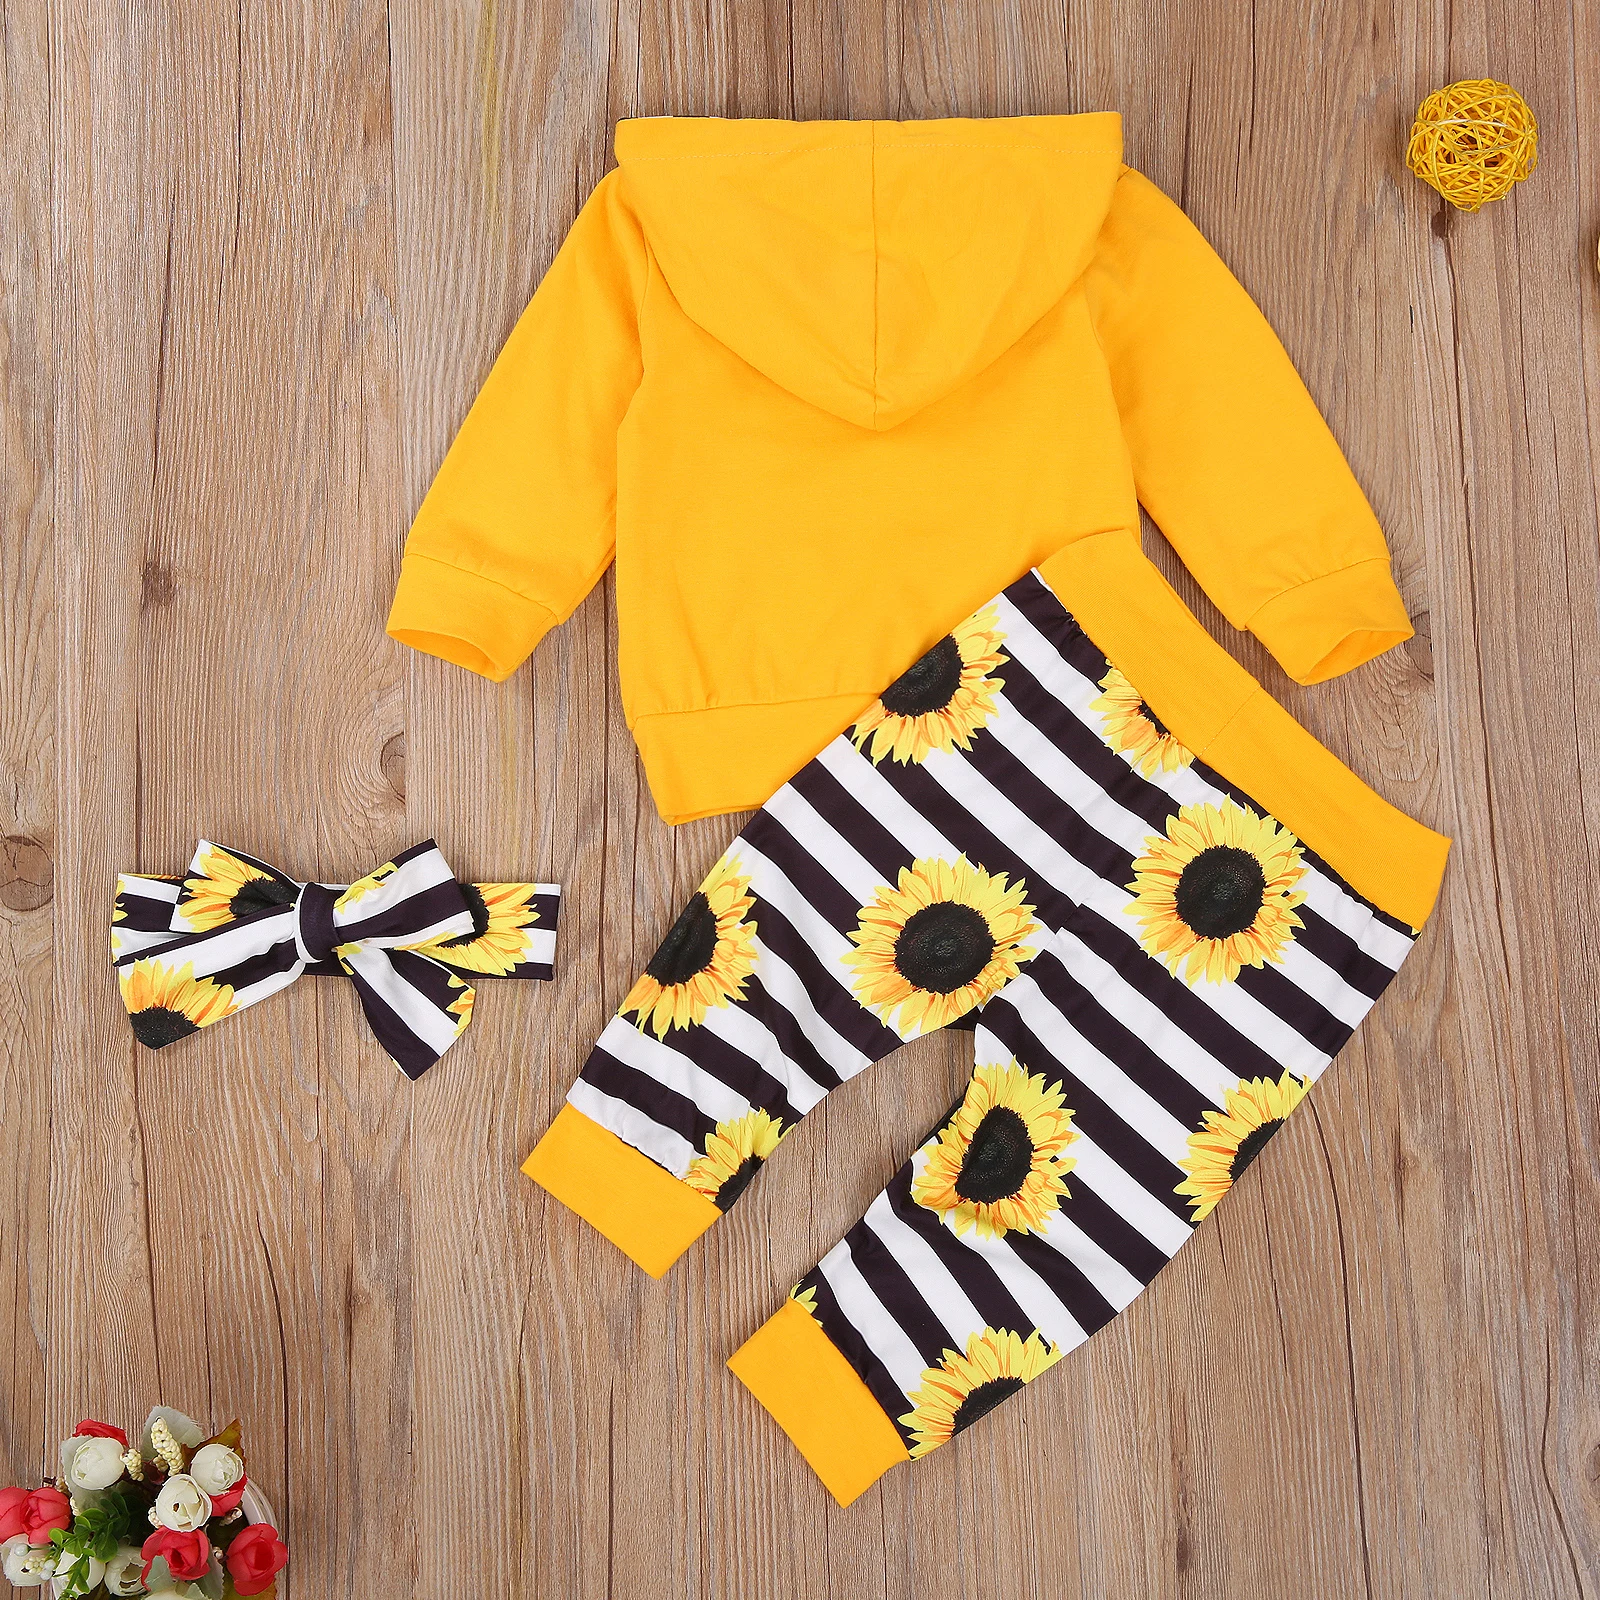 

Pudcoco 2020 Autumn 0-24M Infant Baby Girl 3Pcs Set Yellow Hooded Sunflower Stripes Print Long Sleeve Front Pocket Top+Pants+Bow